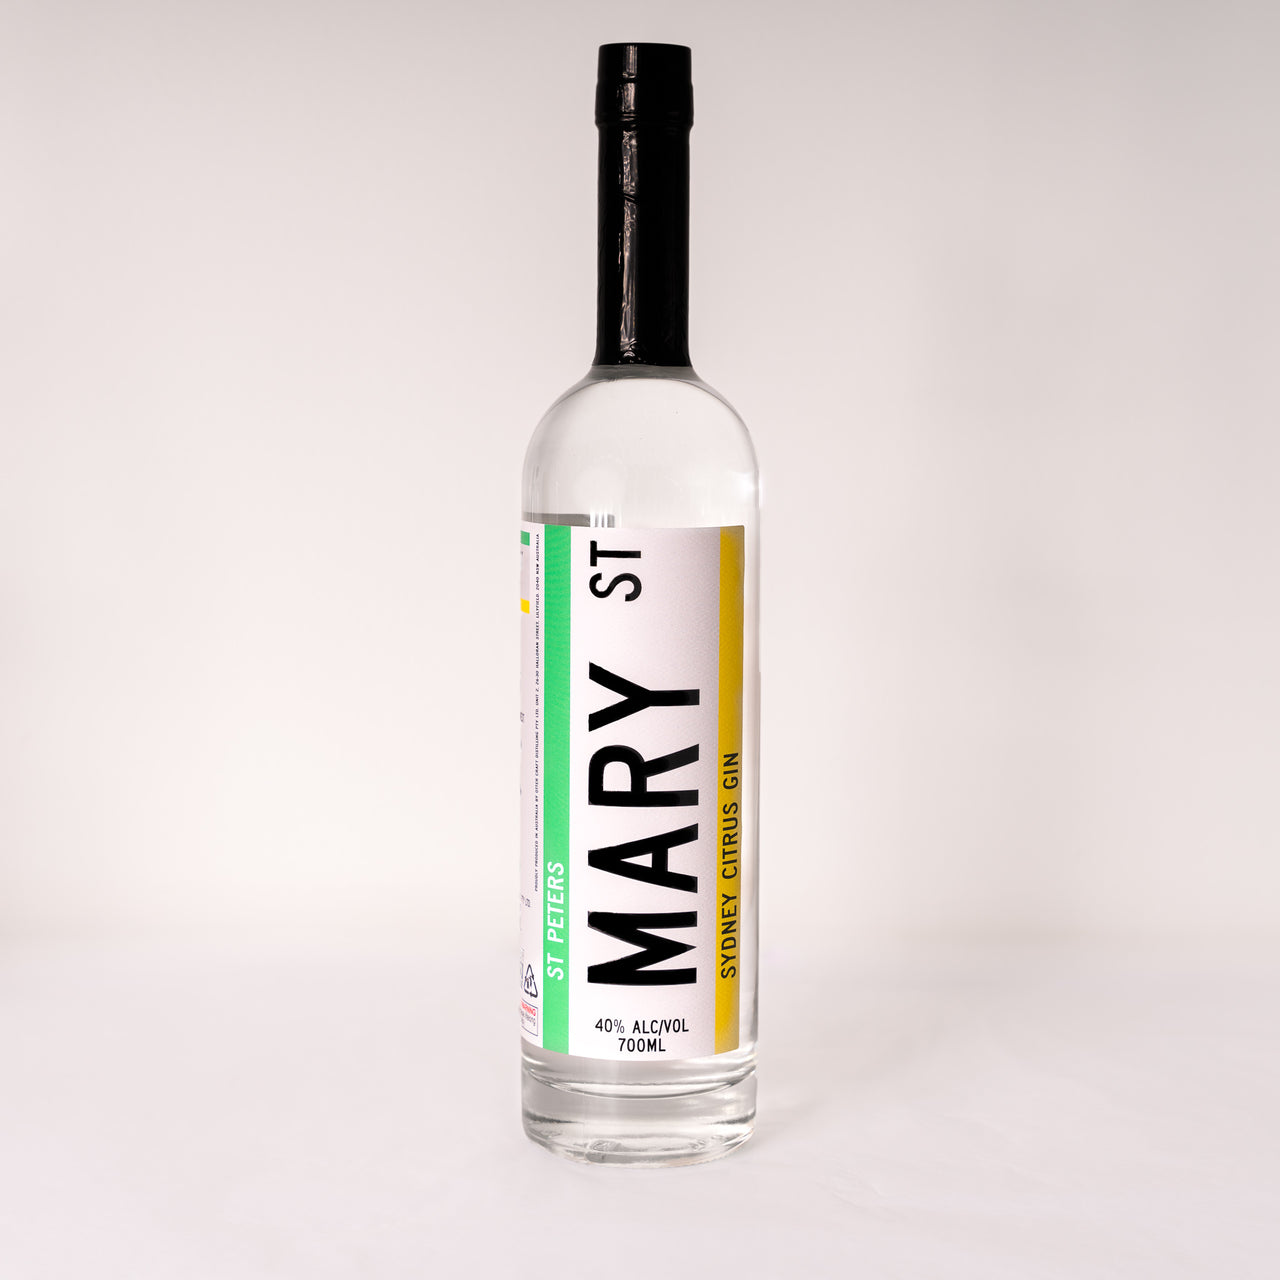 Mary St Citrus Gin